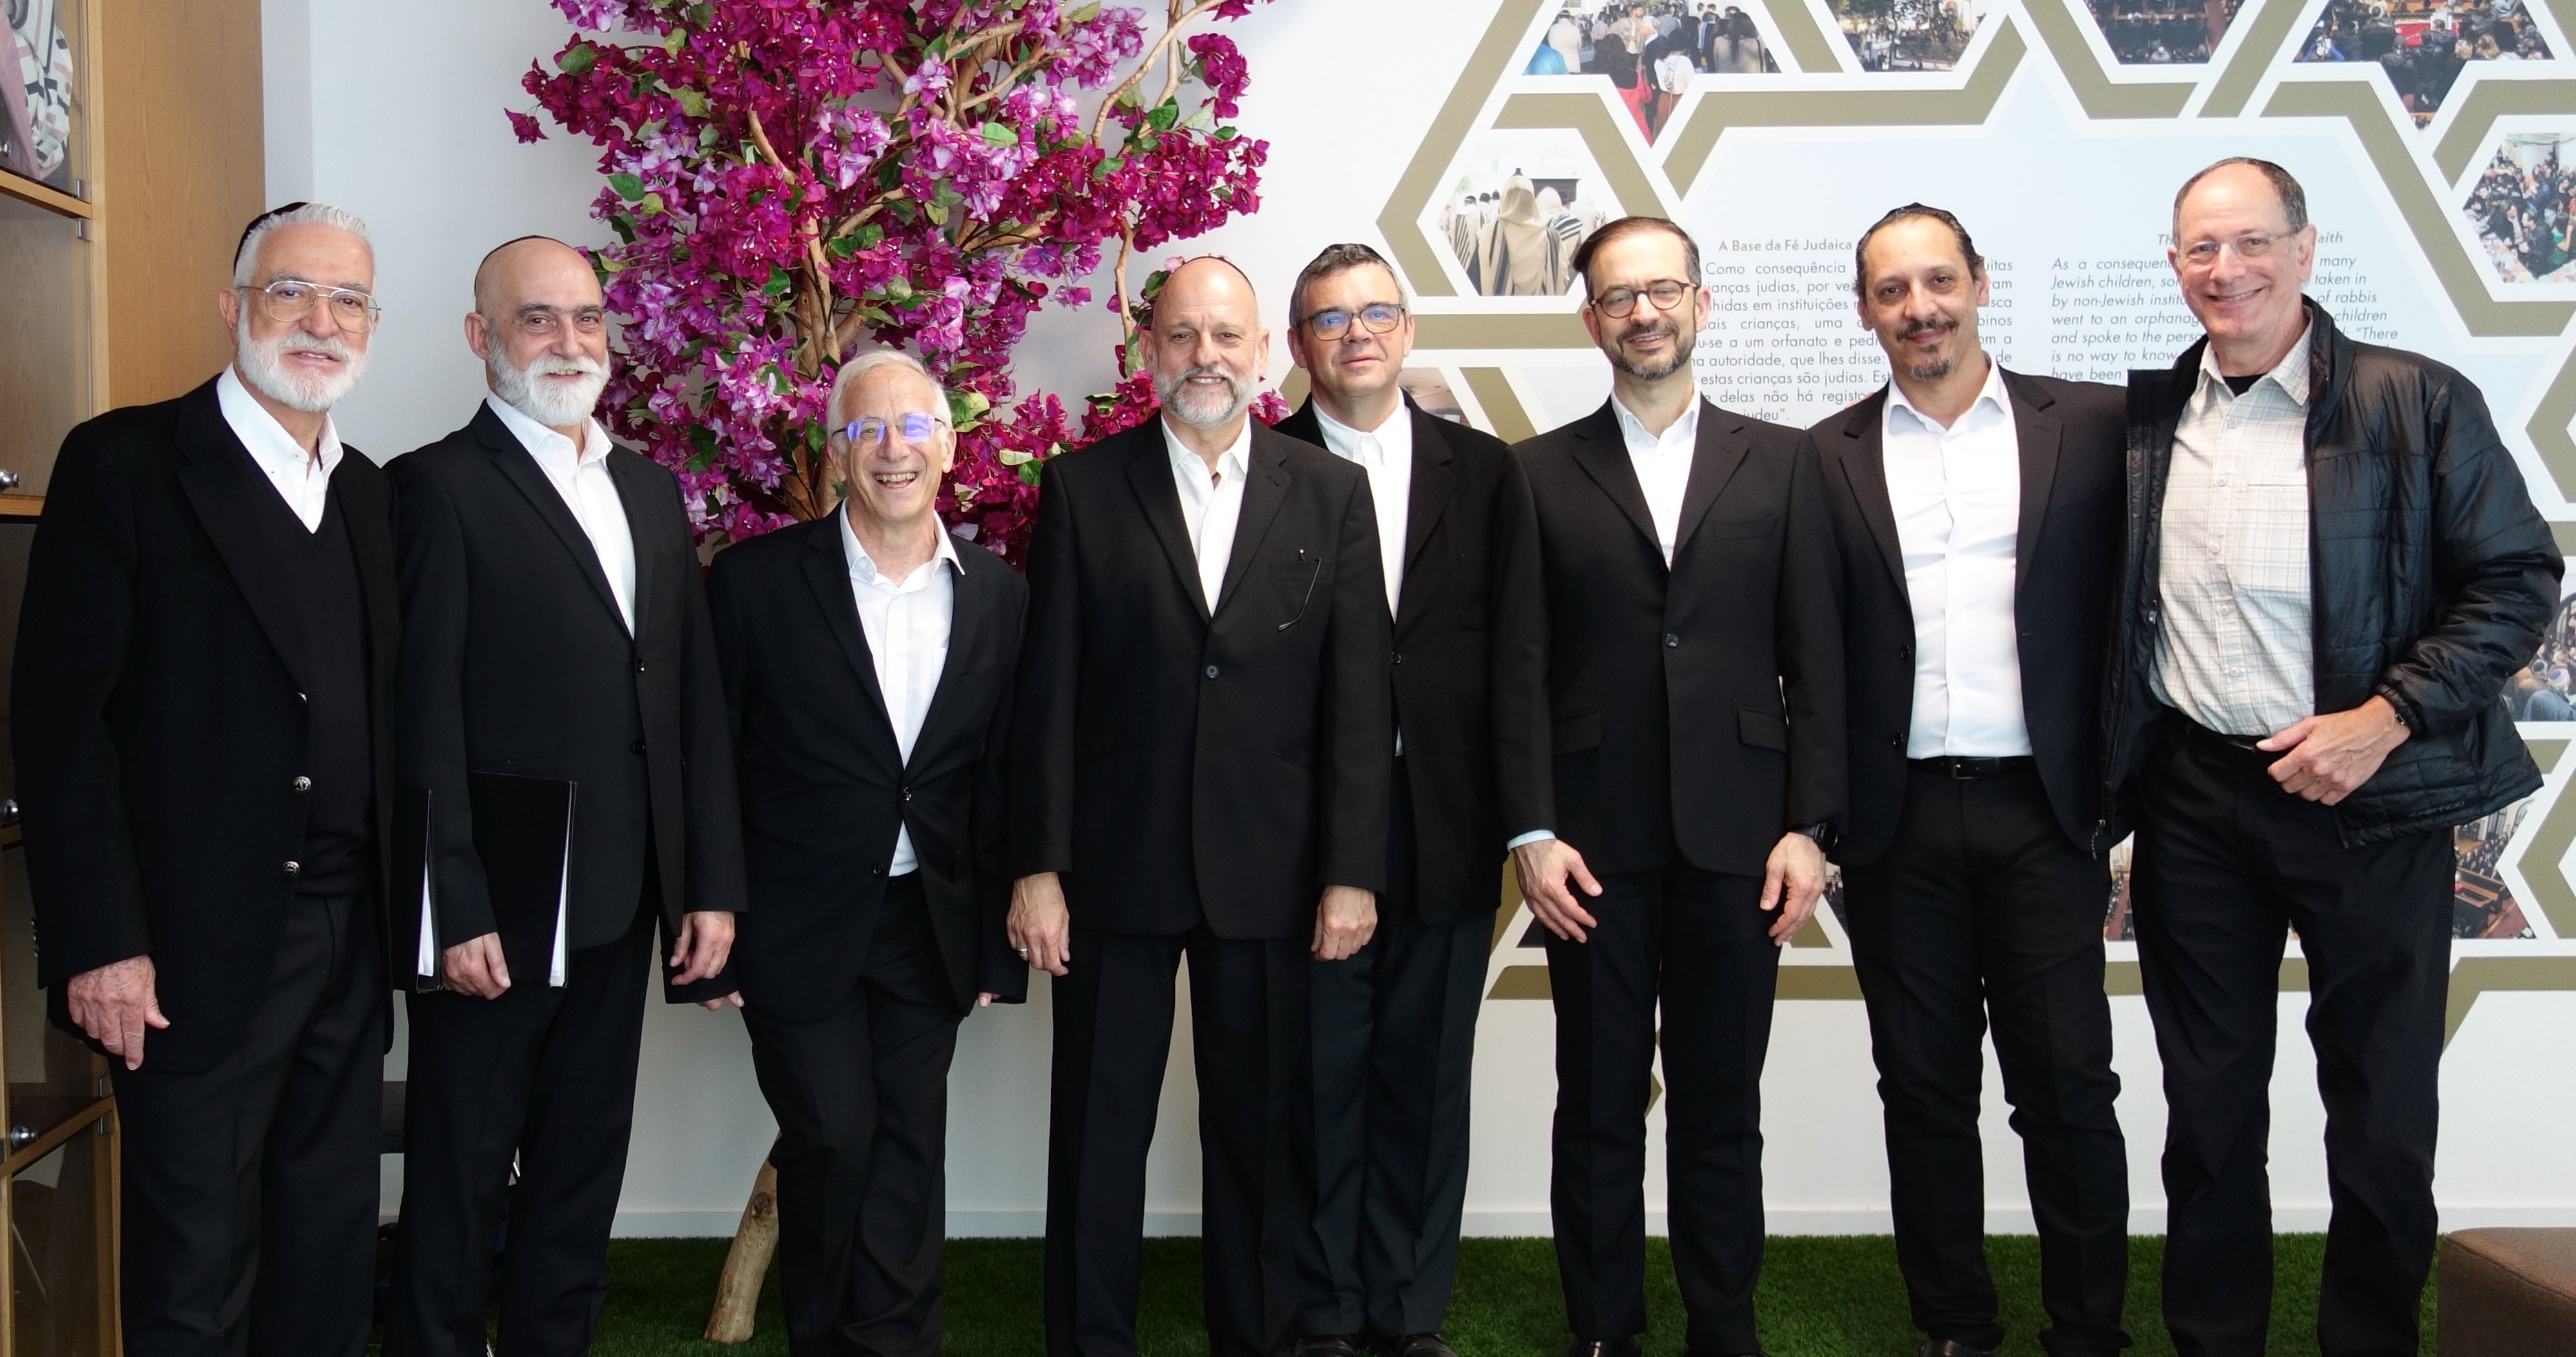 Concert of the Mekor Haim Choir at the Porto Holocaust Museum on March 17